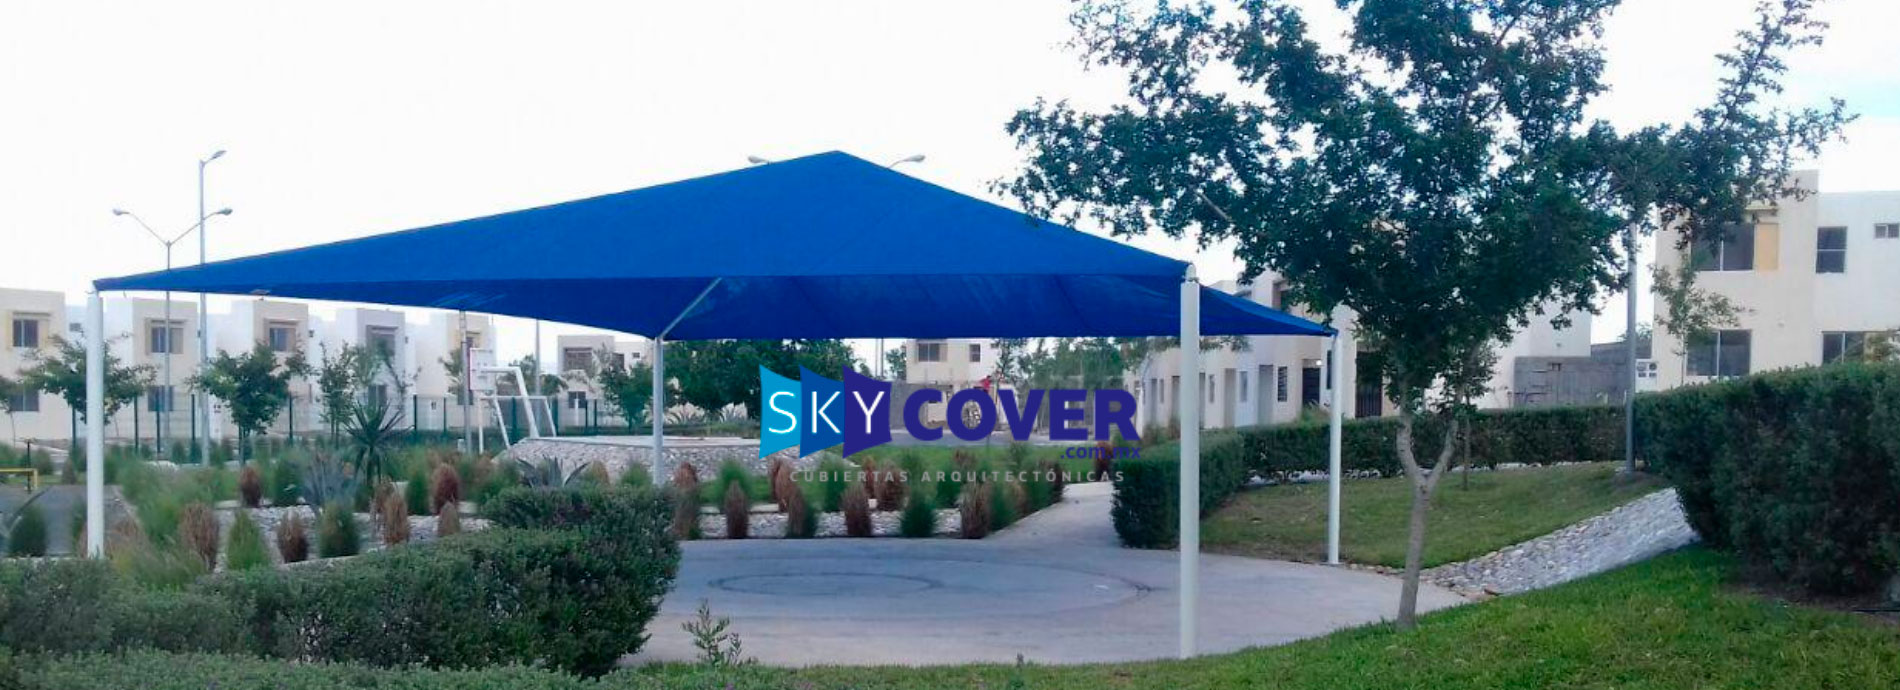 Skycover